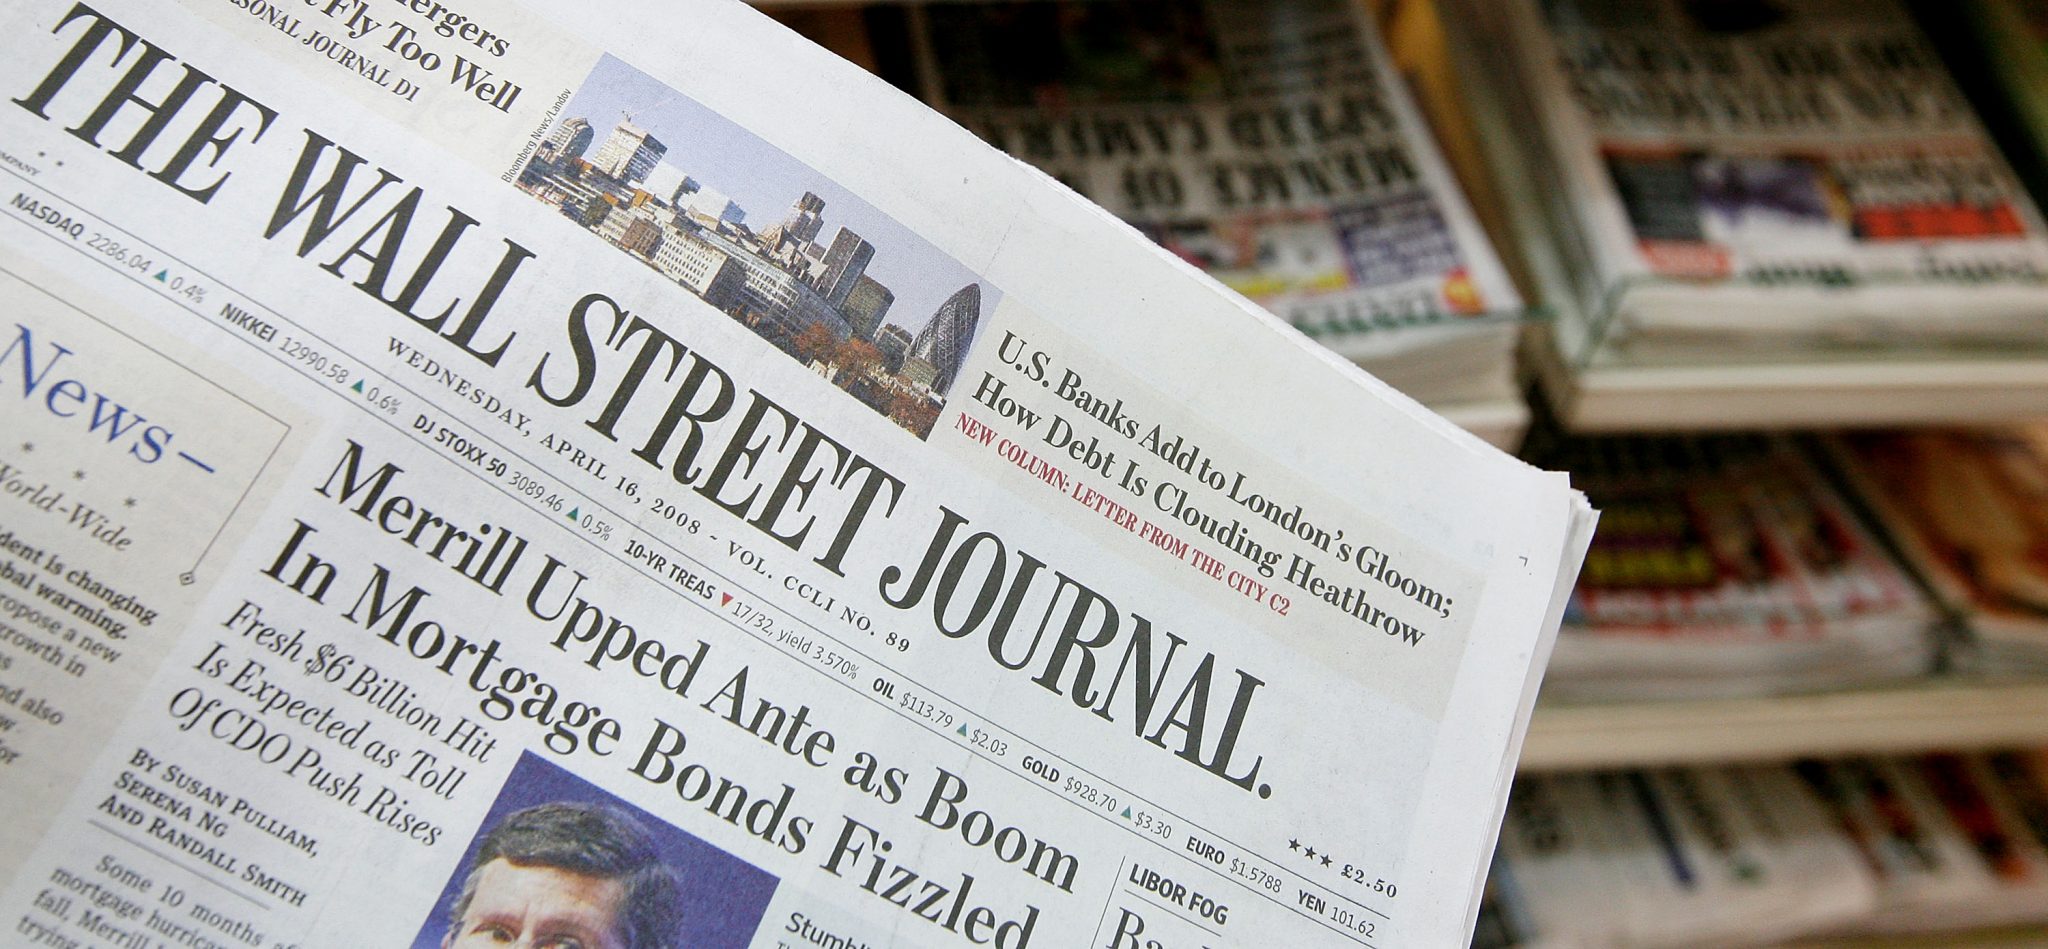 Wall Street Journal Editors Hit Back At ‘misinformation’ And ‘racism